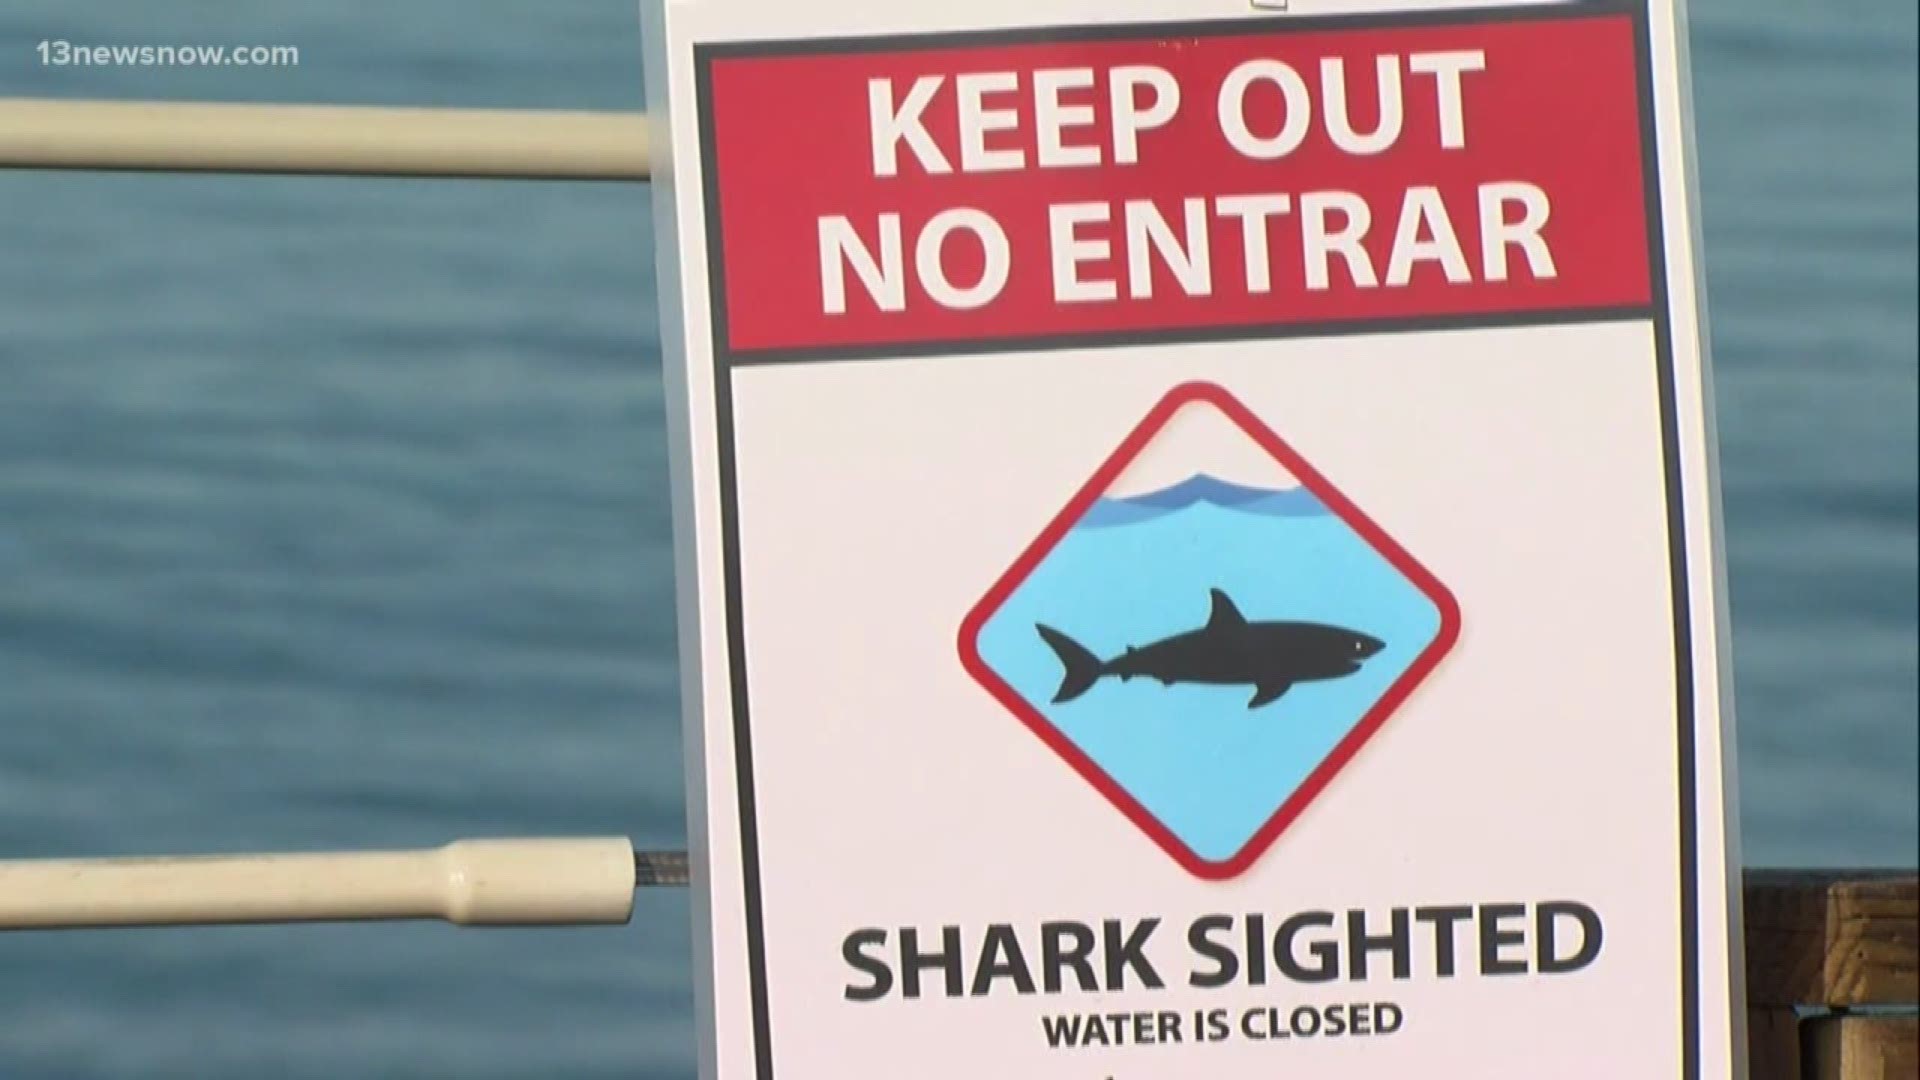 Shark attacks are on the news a lot because they're on the rise, but that is also because development along the coast is increasing.